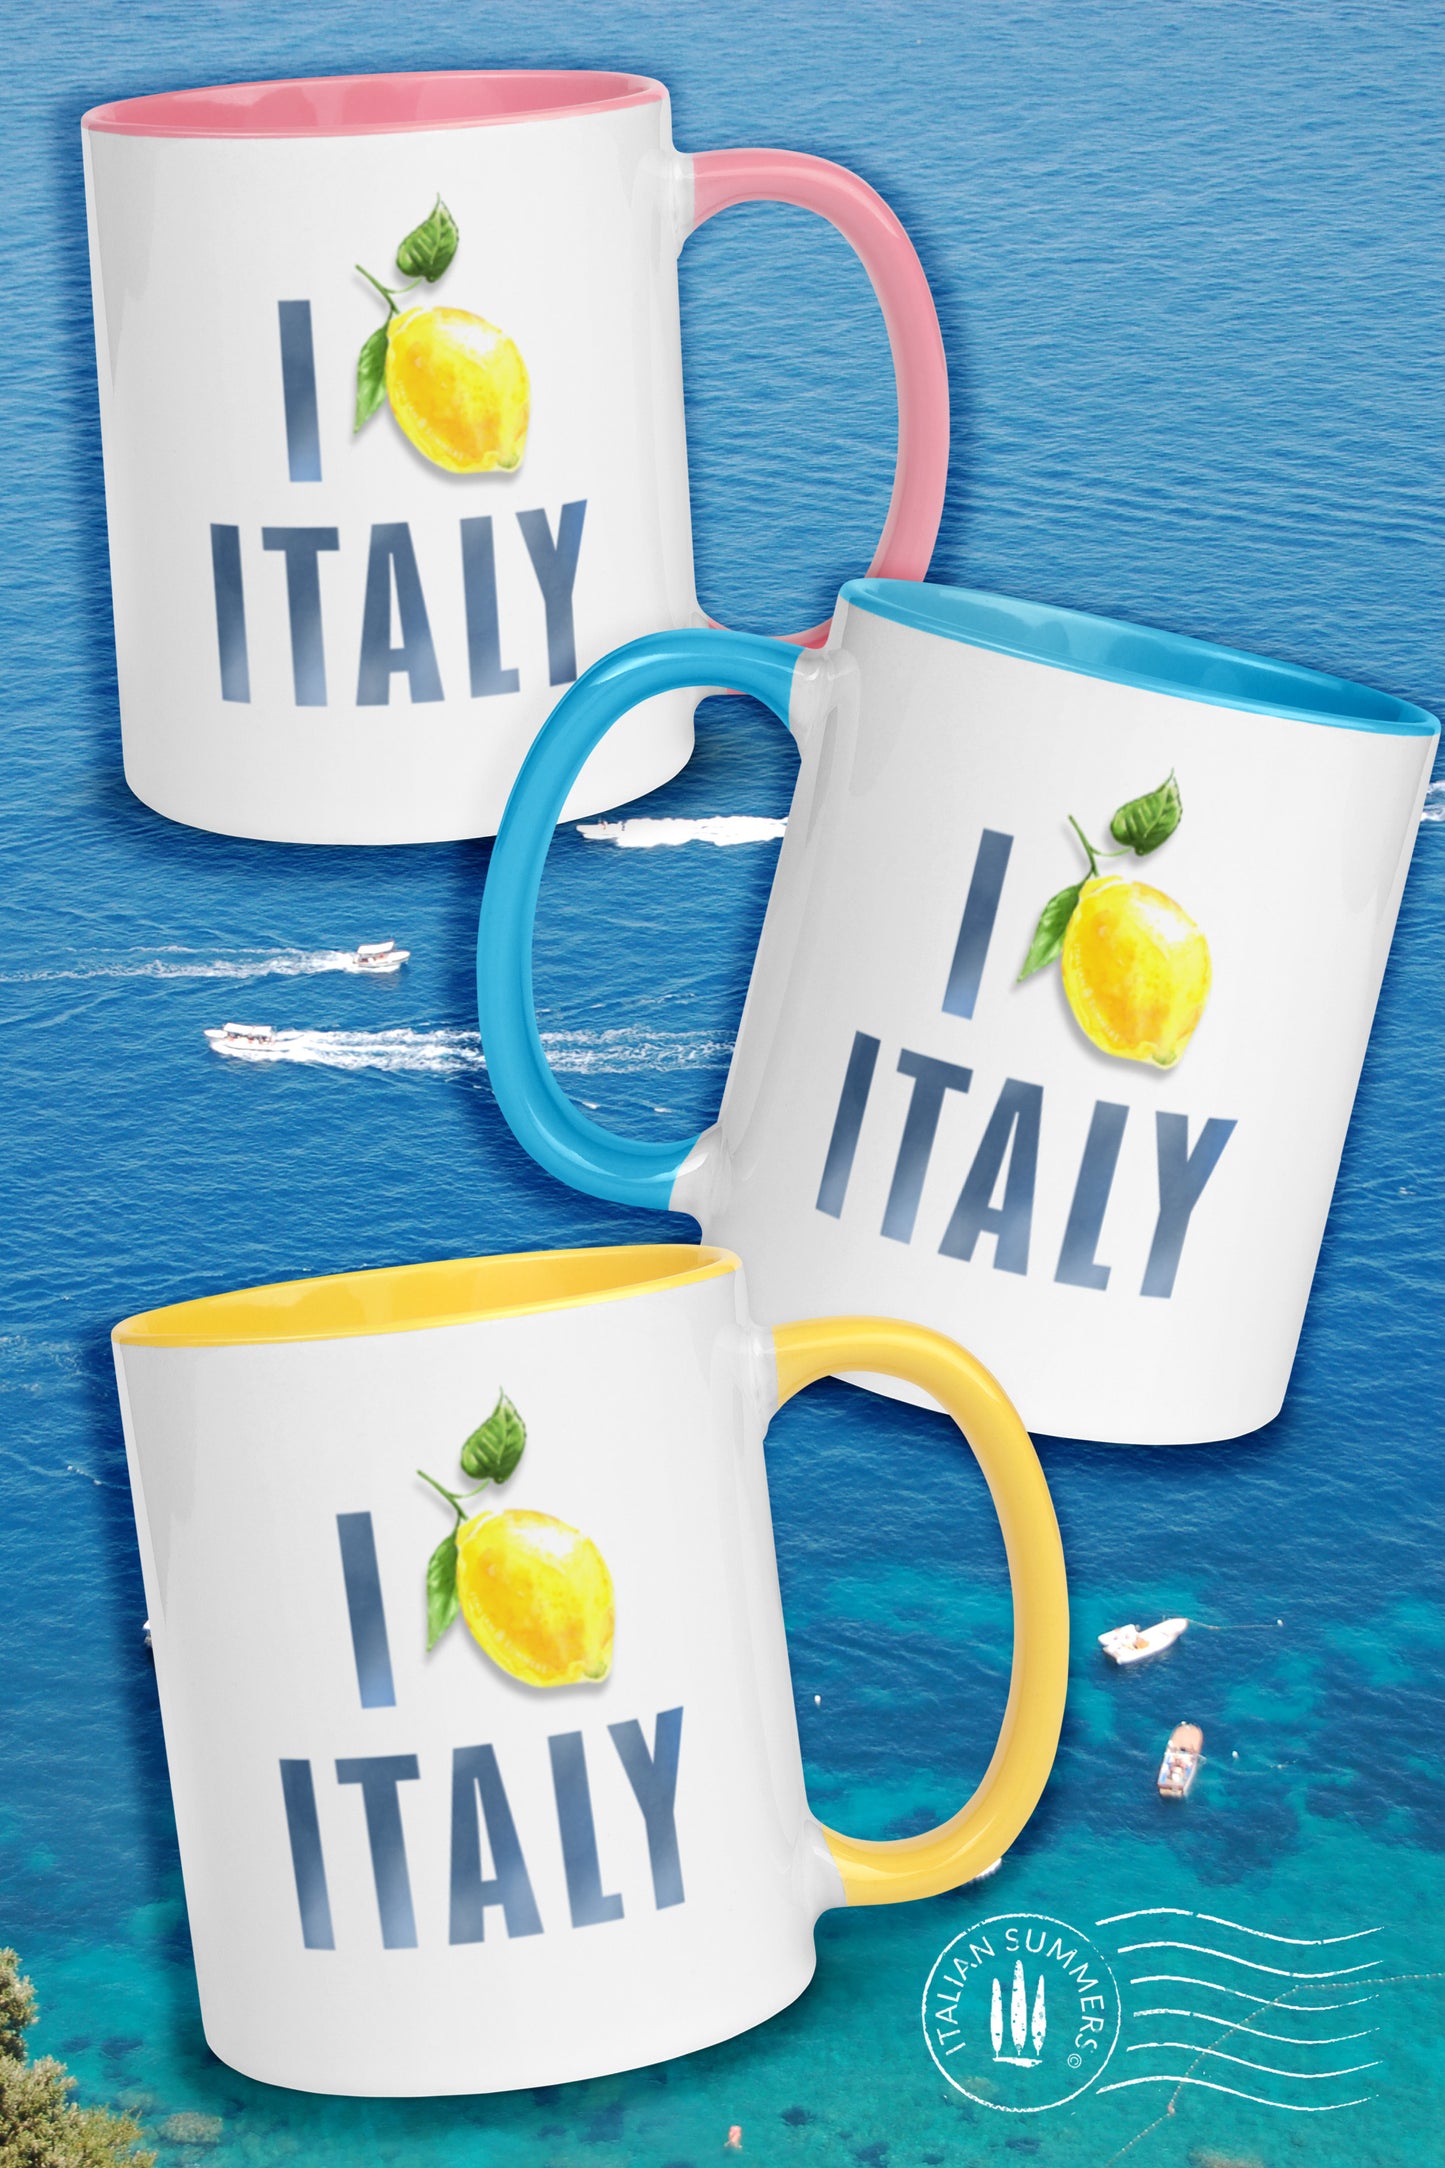 Italy inspired mug with the text I love Italy. The word love has been replaced with a nice Amalfi coast lemon. The text is in a slightly faded navy blue. The mug is available in yellow, blue and pink. Printed on both sides. Made by Italian Summers.